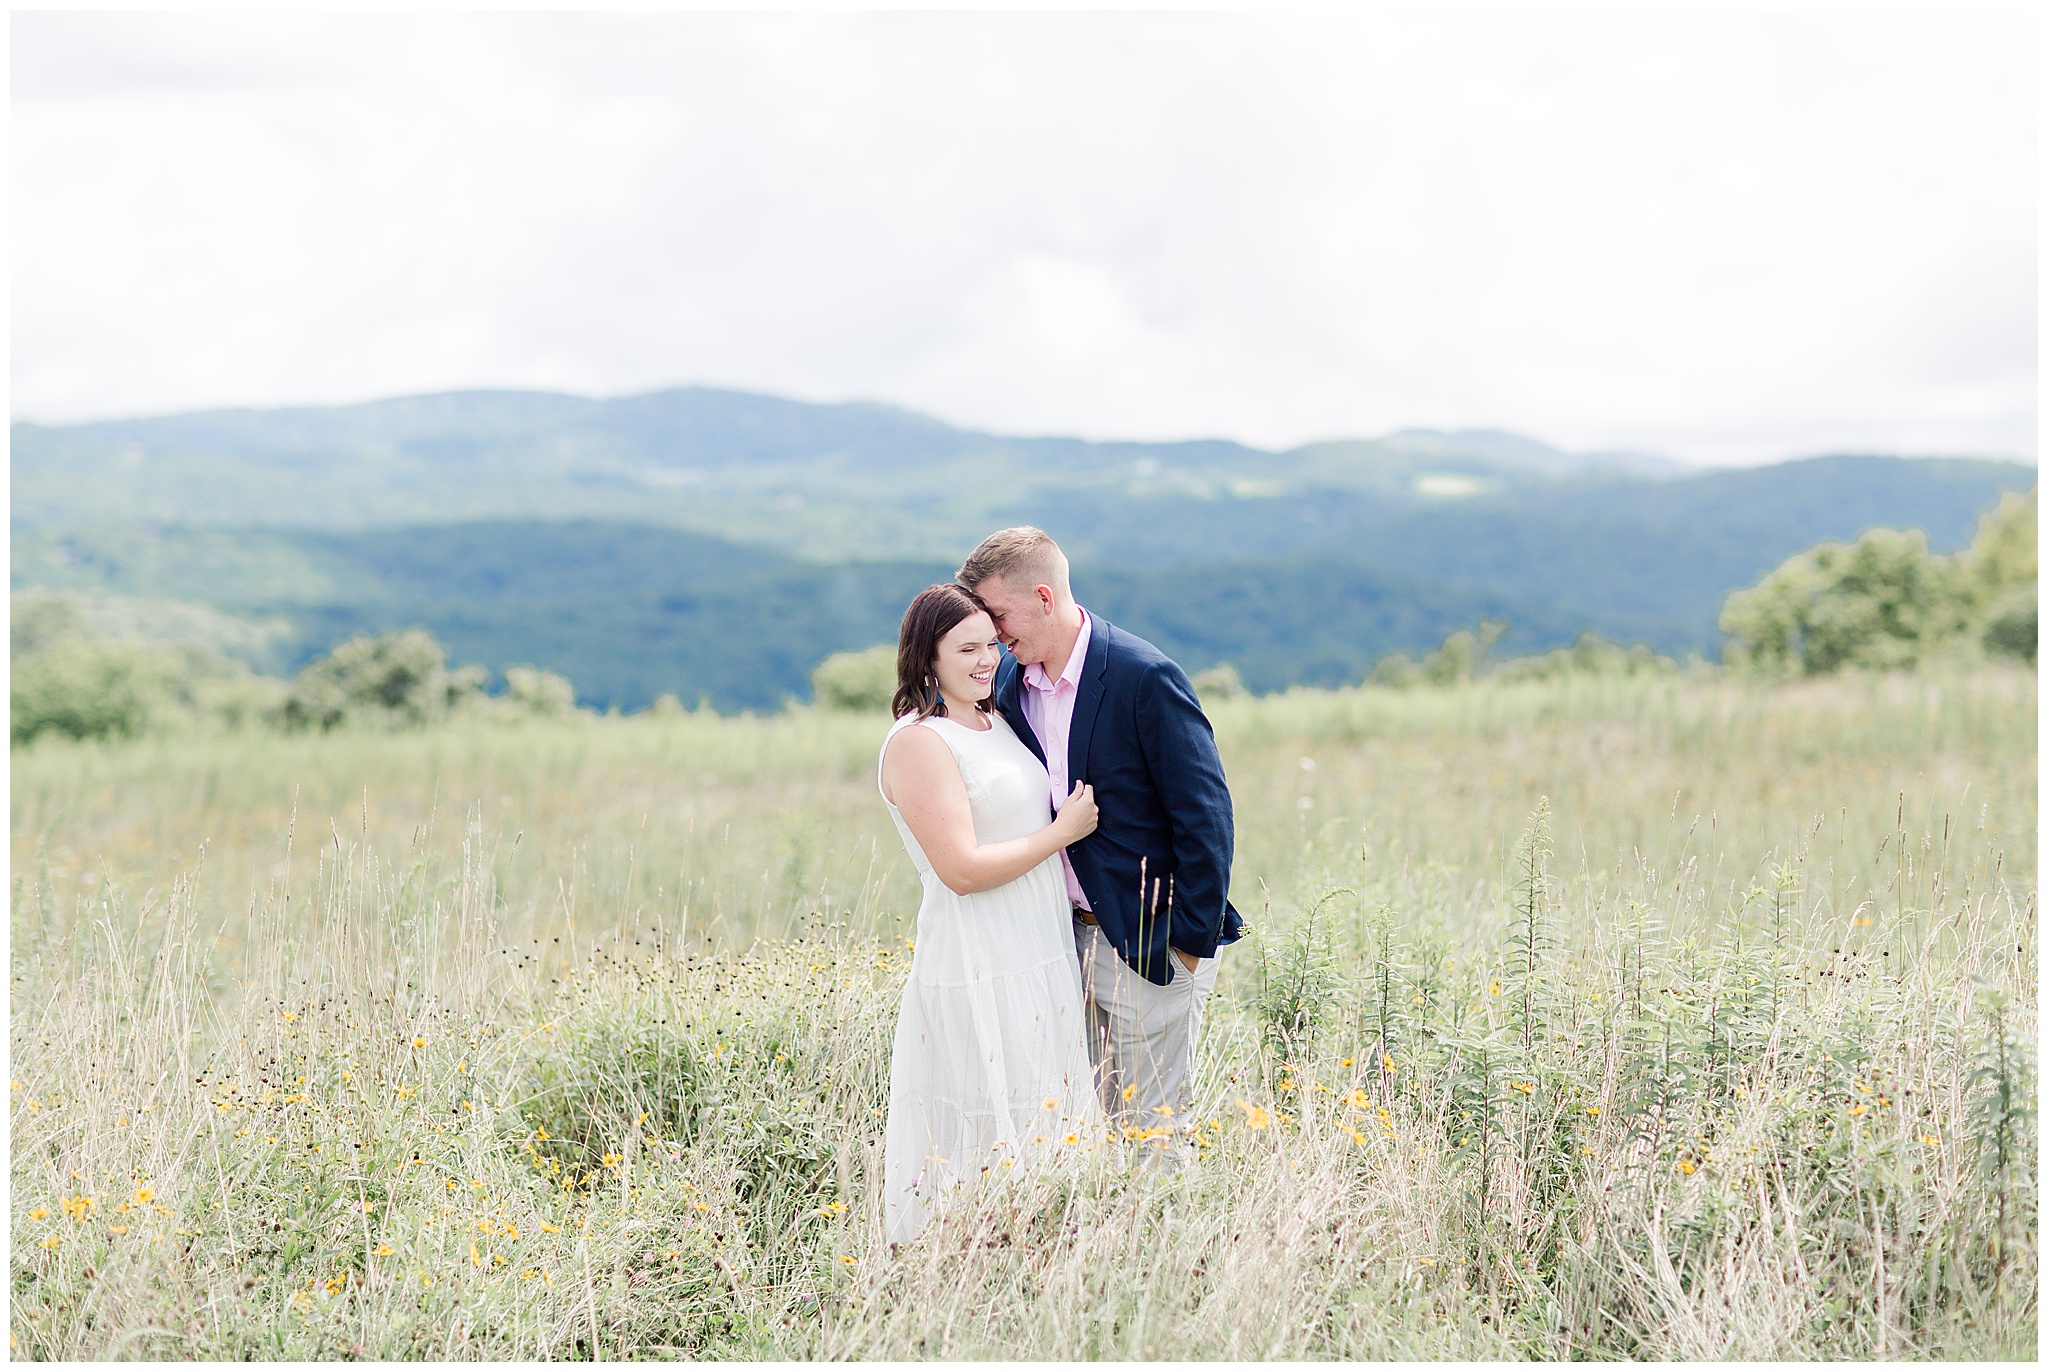 engaged couple in a field with the mountain scape behind them wind blowing in hair at moses cone park with girl in white dress navy suit jacket